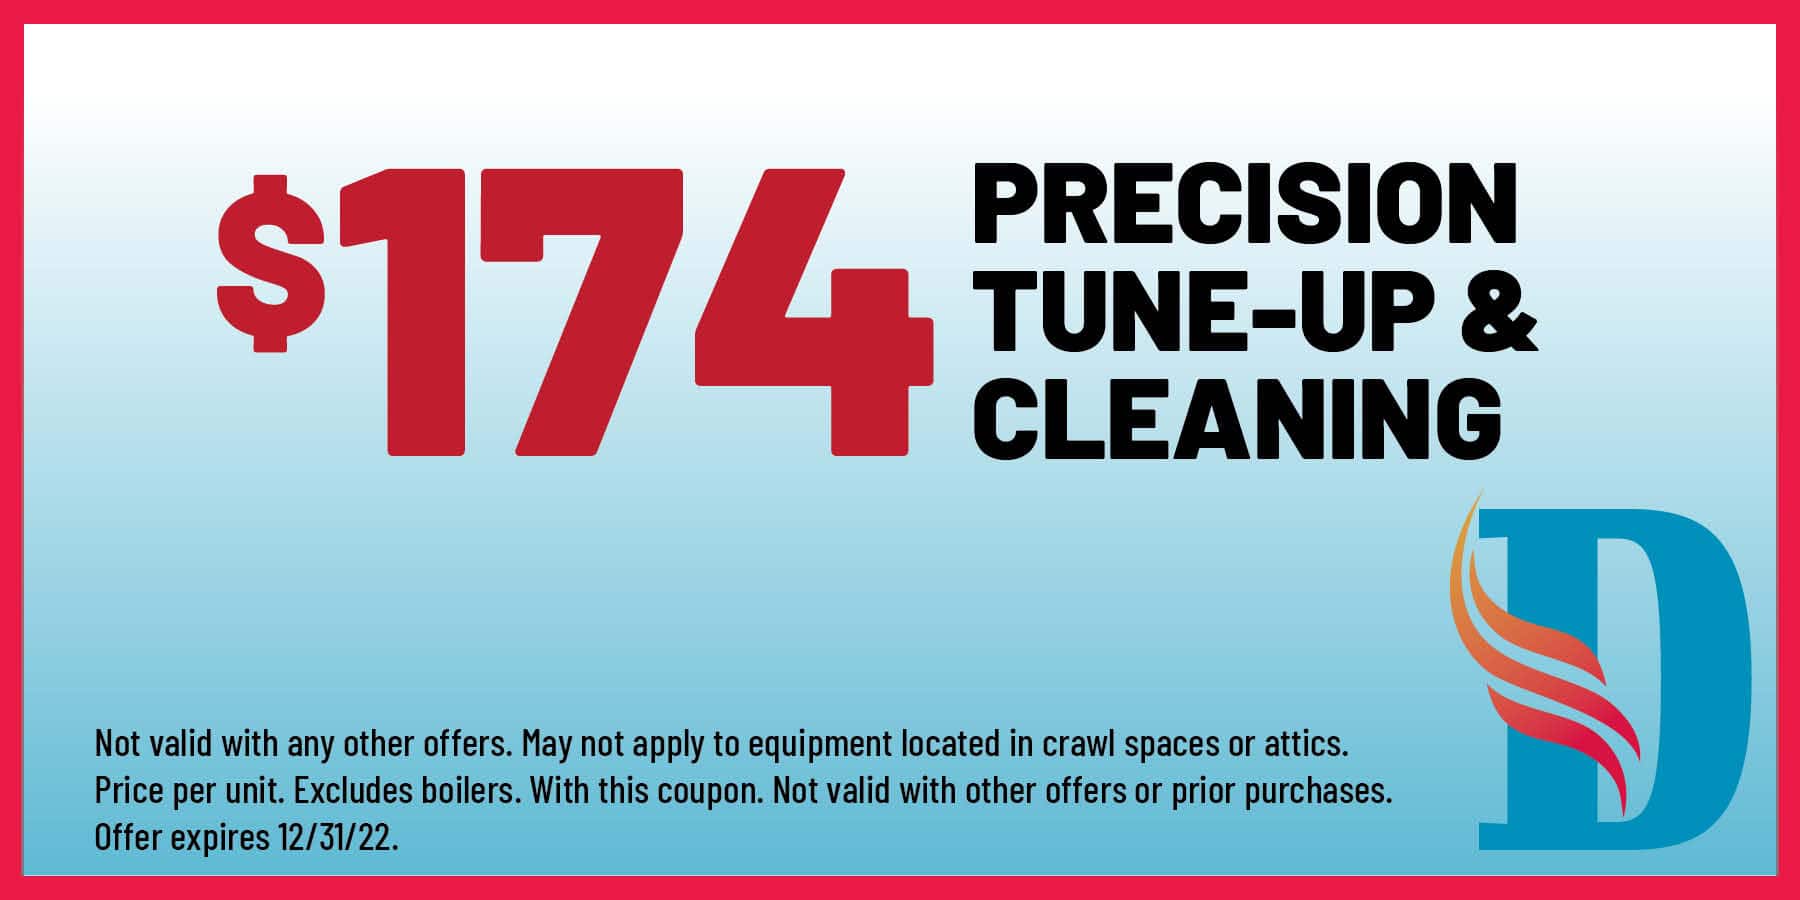 4 precision tune-up & cleaning coupon.